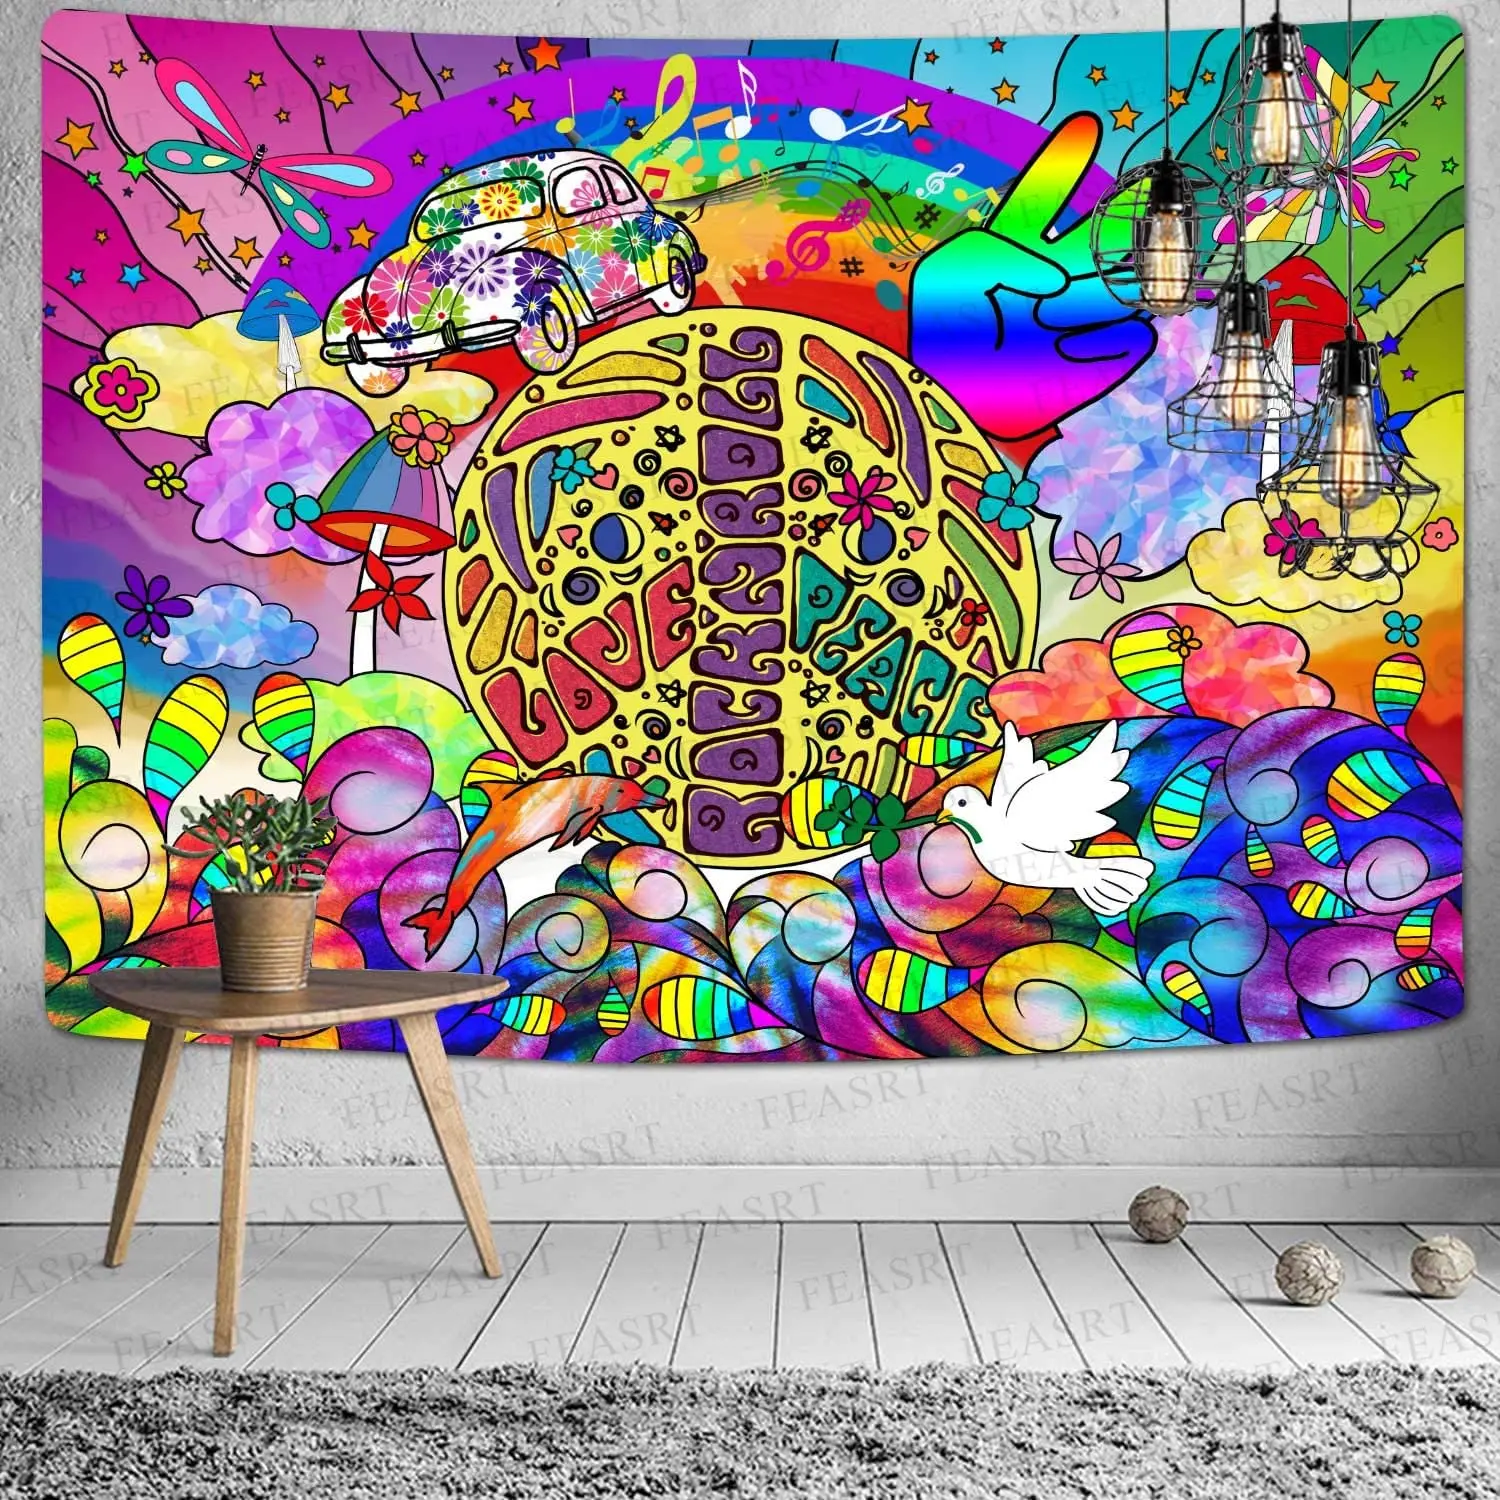 

Old Style Hippie Art Groovy Tapestry Peace And Love Symbol Rainbow Wall Blanket Abstract Colorful Wall Hanging For Room